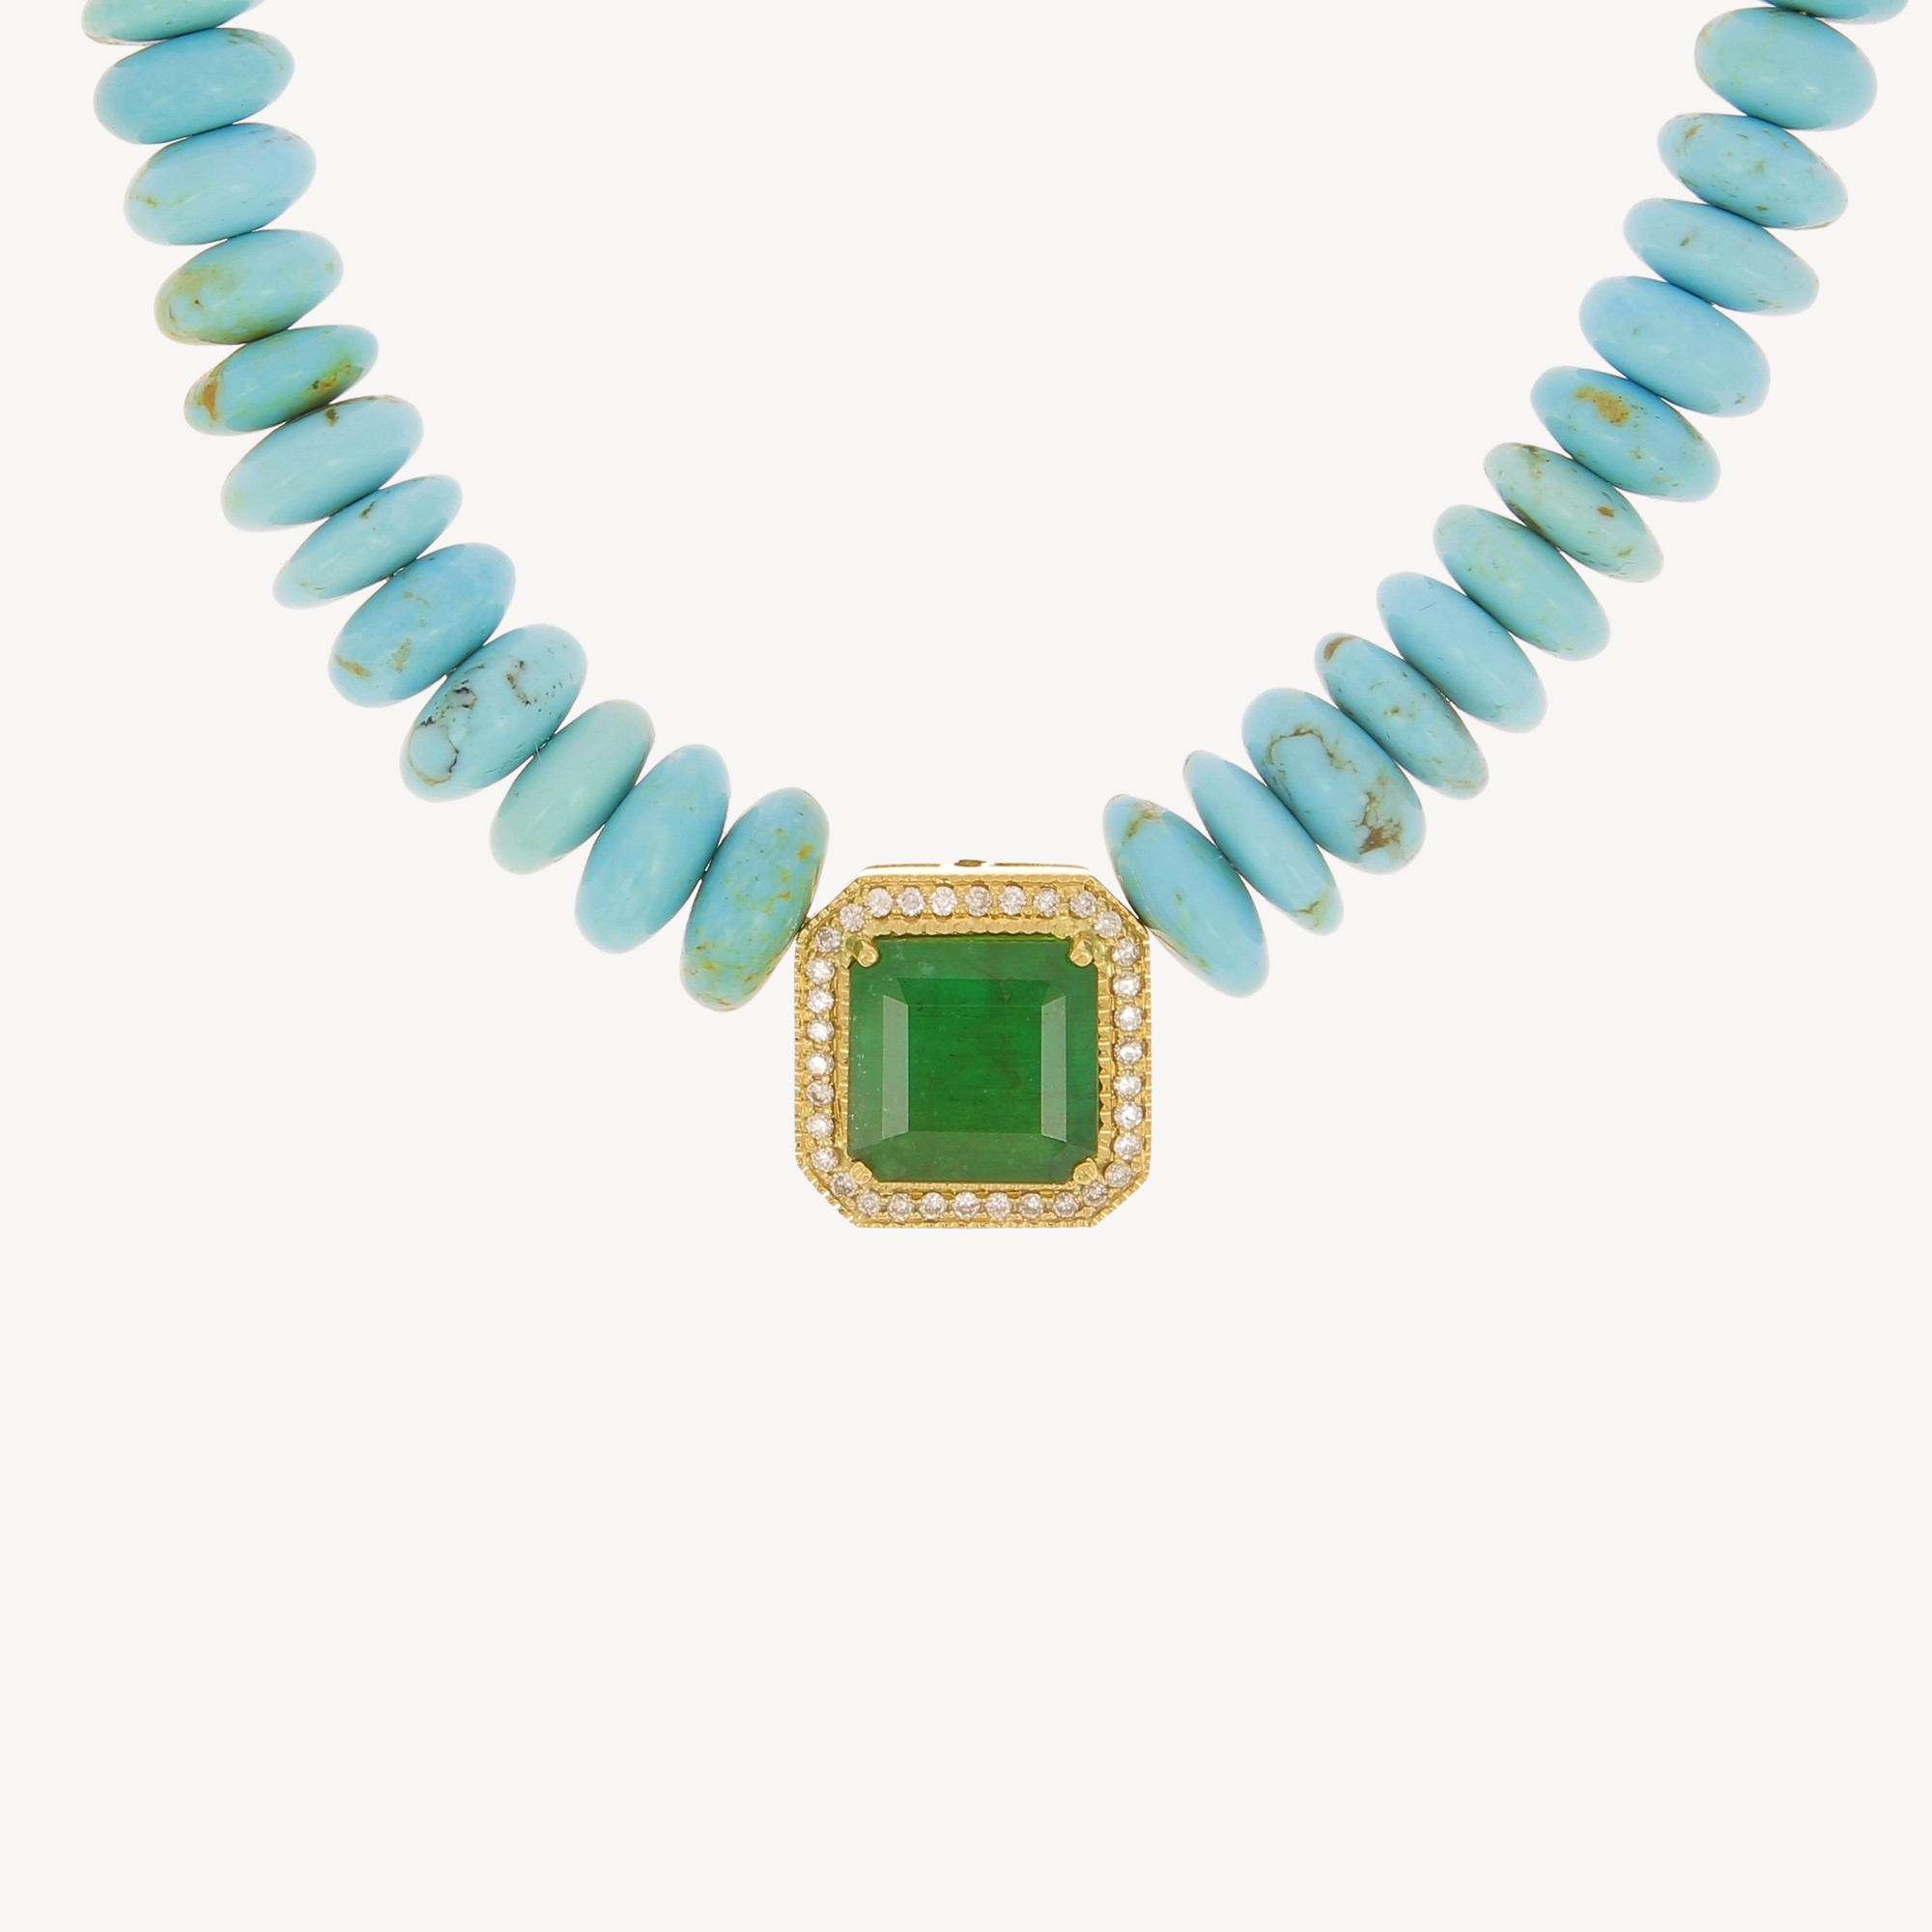 Turquoise and Square Emerald Necklace Paved with Diamonds